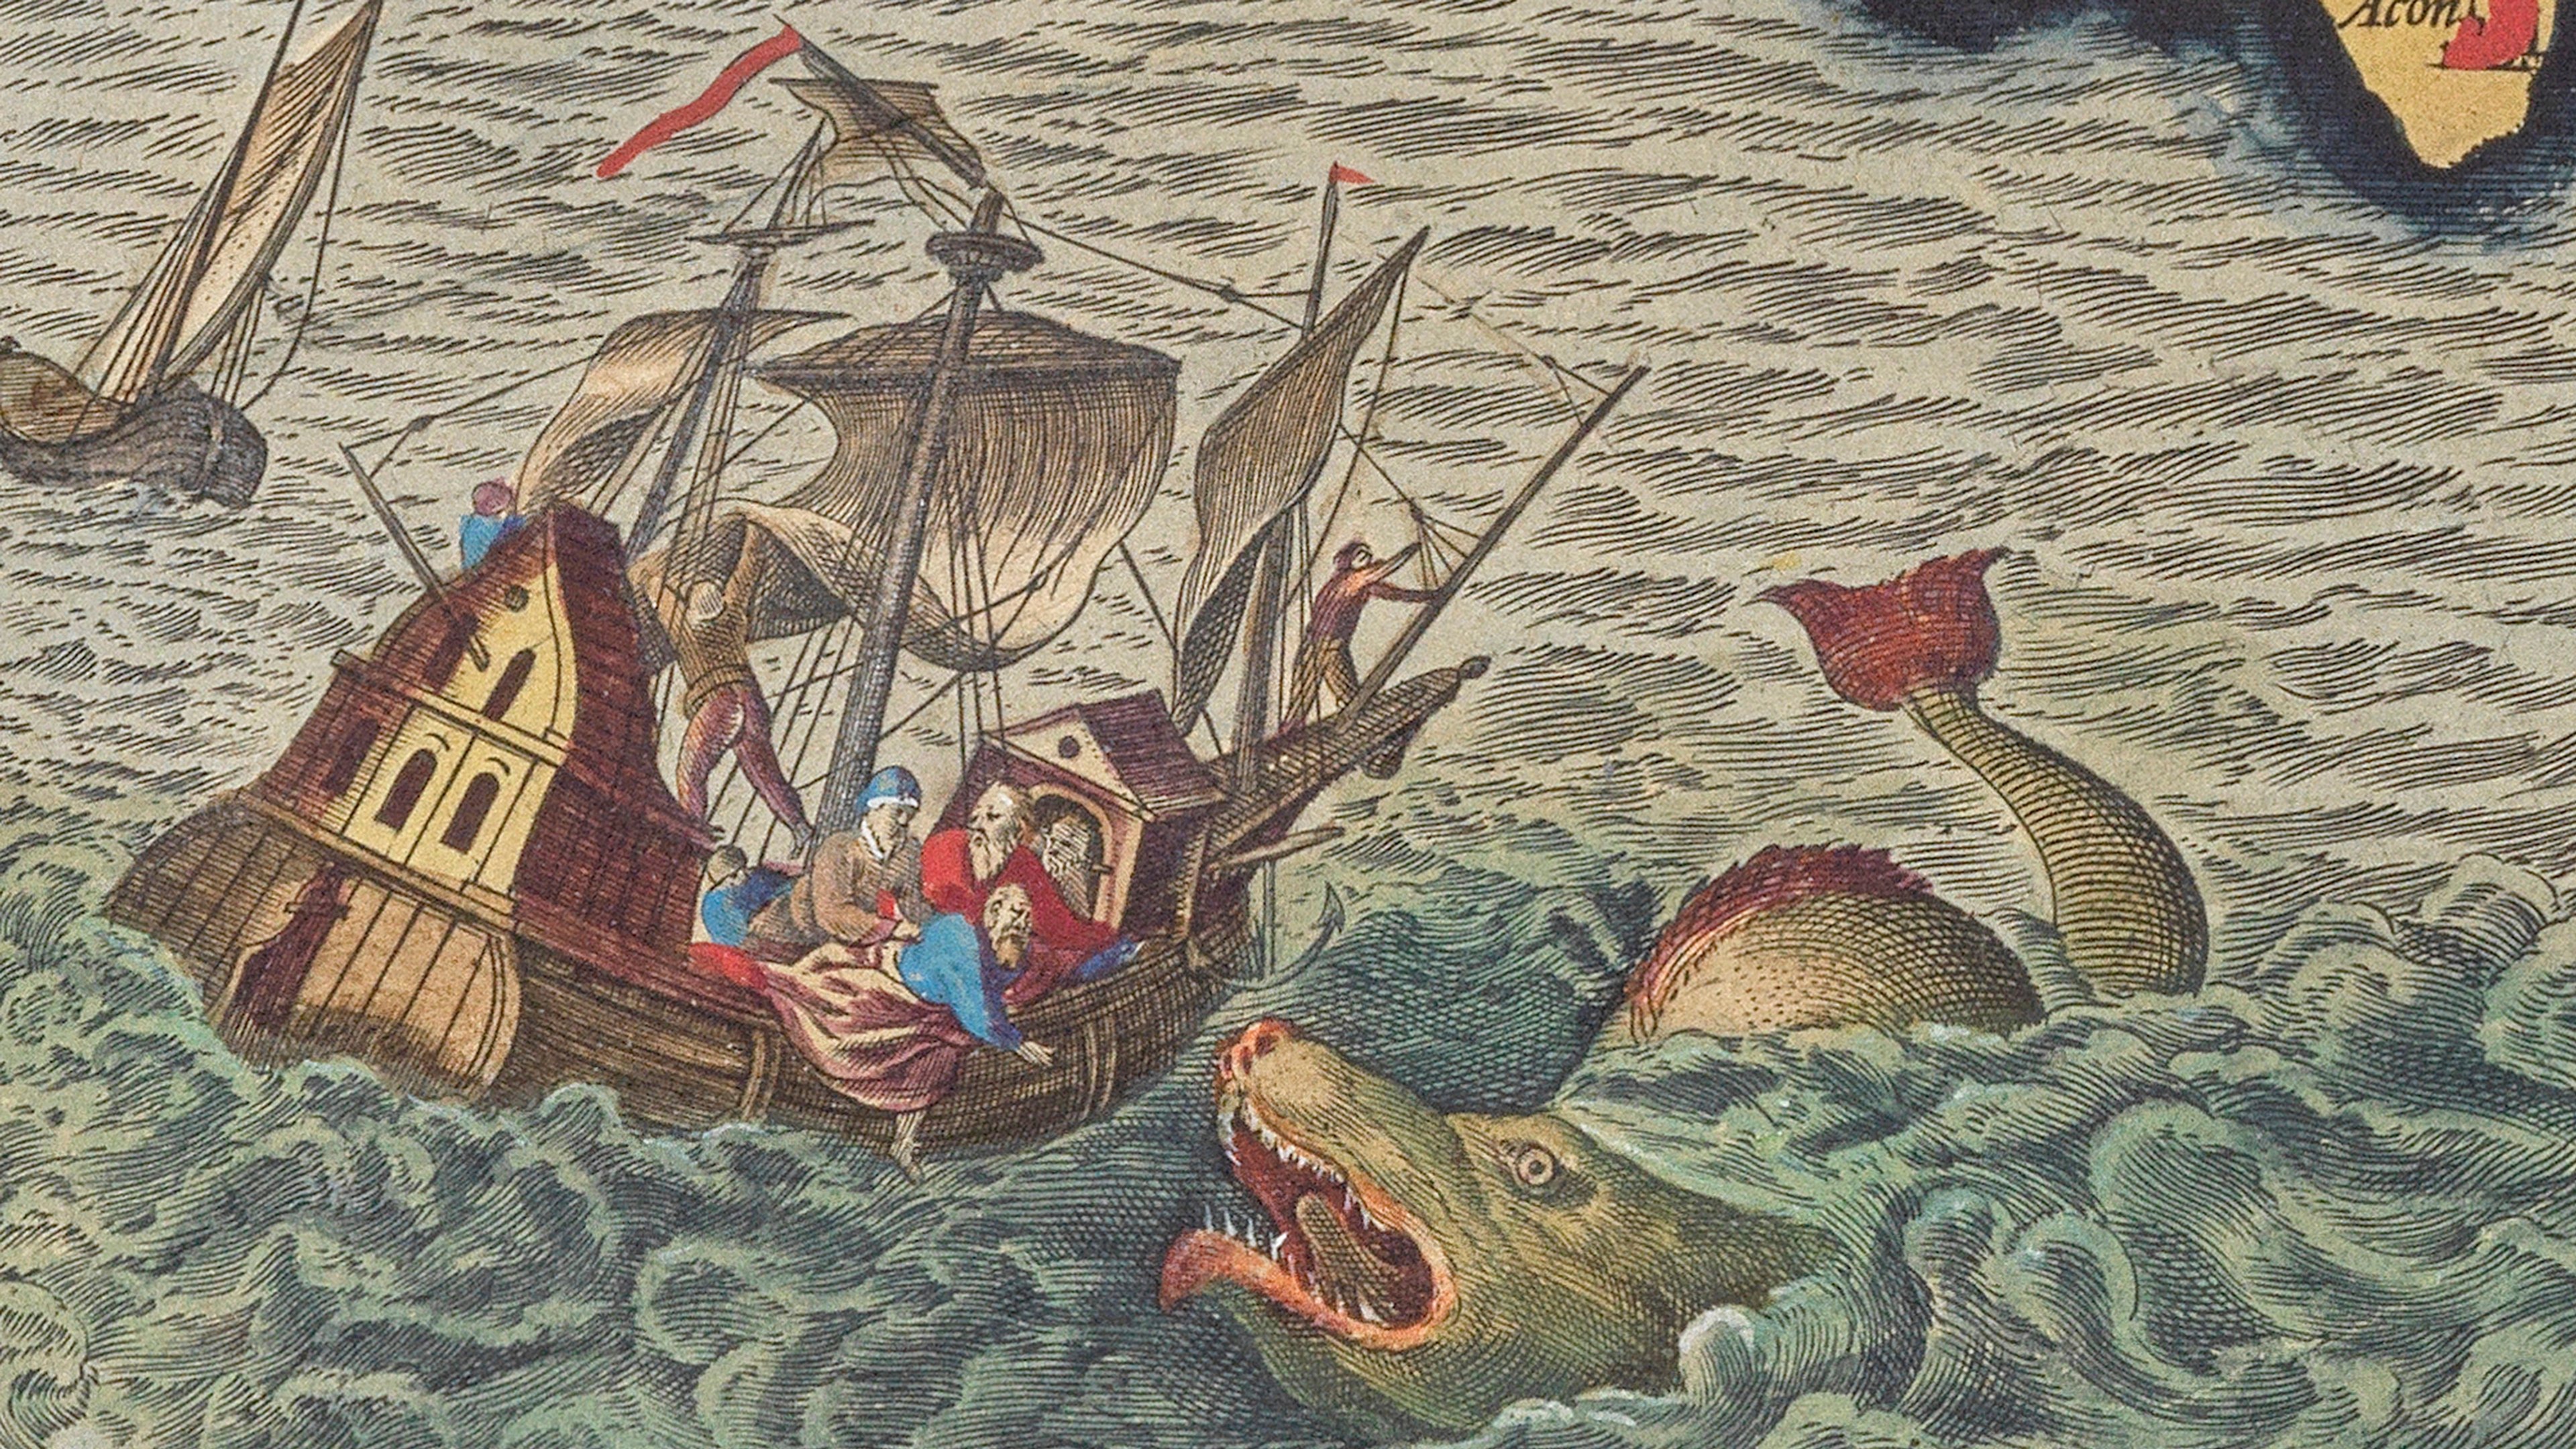 Engraving of Jonah and the whale